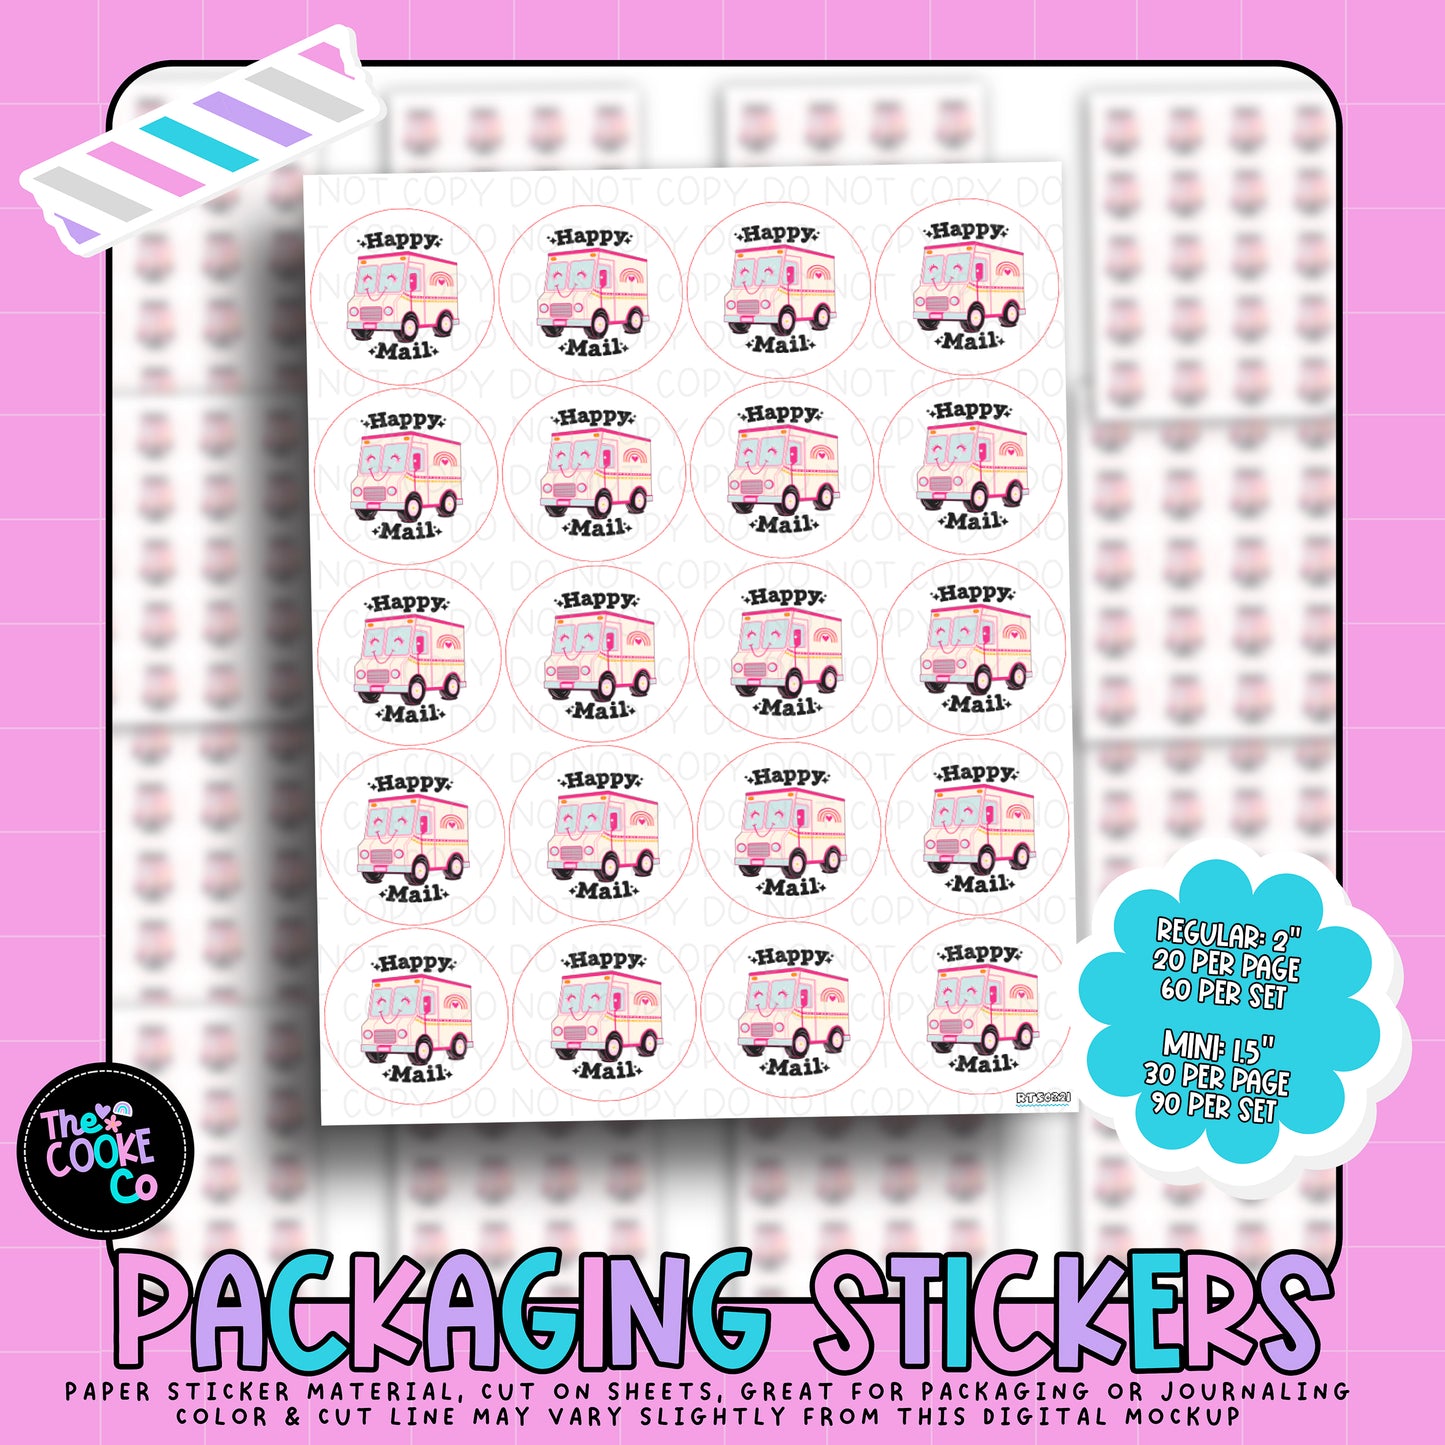 Packaging Stickers | #RTS0321 - HAPPY MAIL TRUCK